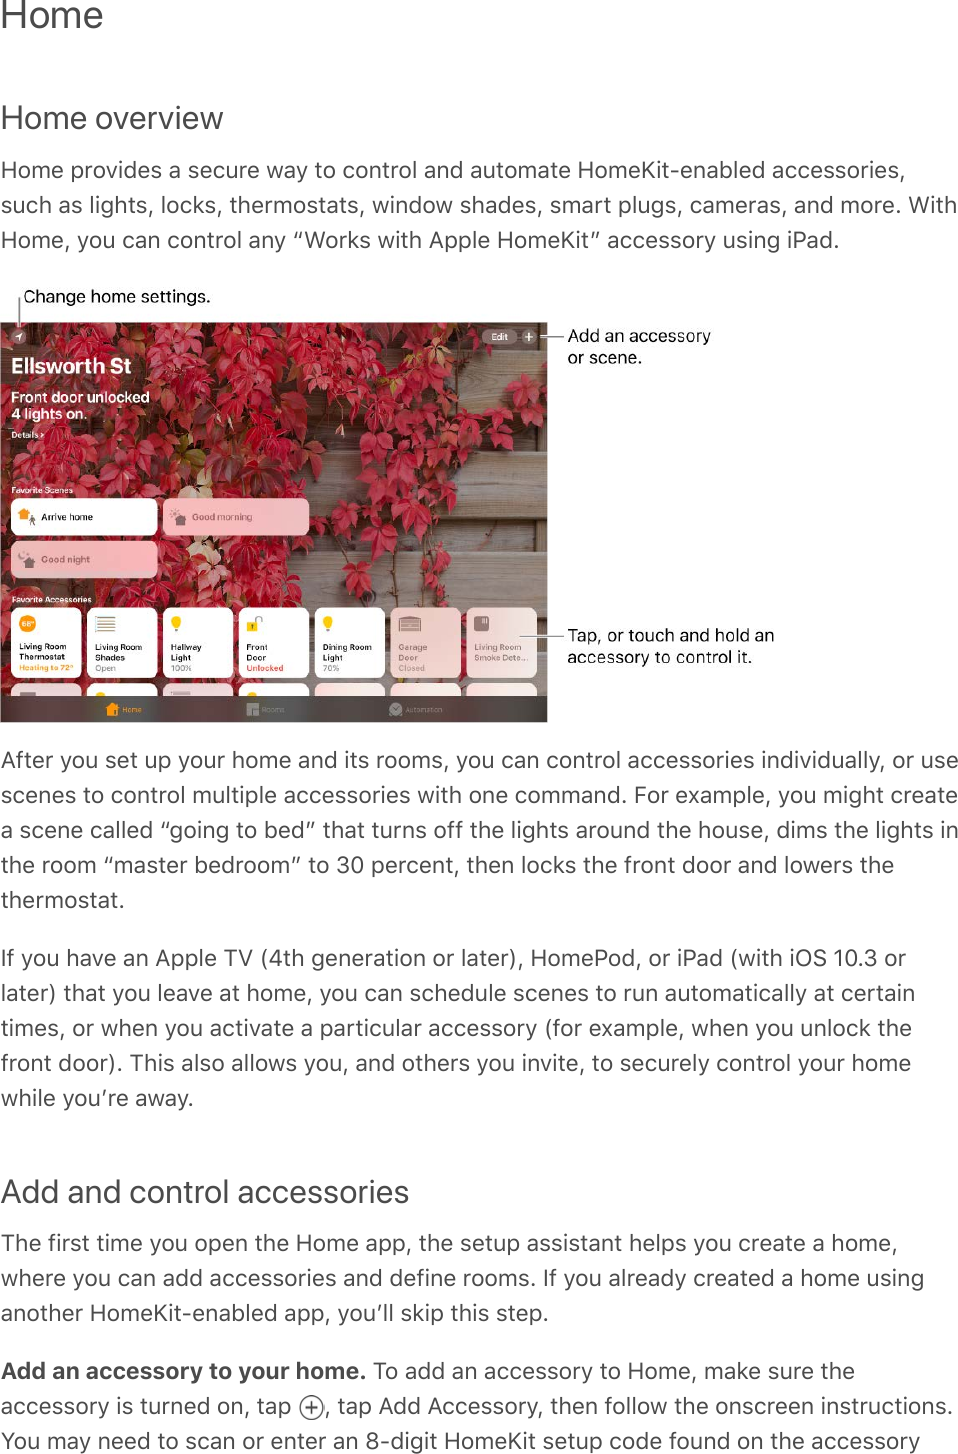 HomeHome overviewHome provides a secure way to control and automate HomeKit-enabled accessories,such as lights, locks, thermostats, window shades, smart plugs, cameras, and more. WithHome, you can control any “Works with Apple HomeKit” accessory using iPad.After you set up your home and its rooms, you can control accessories individually, or usescenes to control multiple accessories with one command. For example, you might createa scene called “going to bed” that turns off the lights around the house, dims the lights inthe room “master bedroom” to 30 percent, then locks the front door and lowers thethermostat.If you have an Apple TV (4th generation or later), HomePod, or iPad (with iOS 10.3 orlater) that you leave at home, you can schedule scenes to run automatically at certaintimes, or when you activate a particular accessory (for example, when you unlock thefront door). This also allows you, and others you invite, to securely control your homewhile youʼre away.Add and control accessoriesThe first time you open the Home app, the setup assistant helps you create a home,where you can add accessories and define rooms. If you already created a home usinganother HomeKit-enabled app, youʼll skip this step.Add an accessory to your home. To add an accessory to Home, make sure theaccessory is turned on, tap  , tap Add Accessory, then follow the onscreen instructions.You may need to scan or enter an 8-digit HomeKit setup code found on the accessory